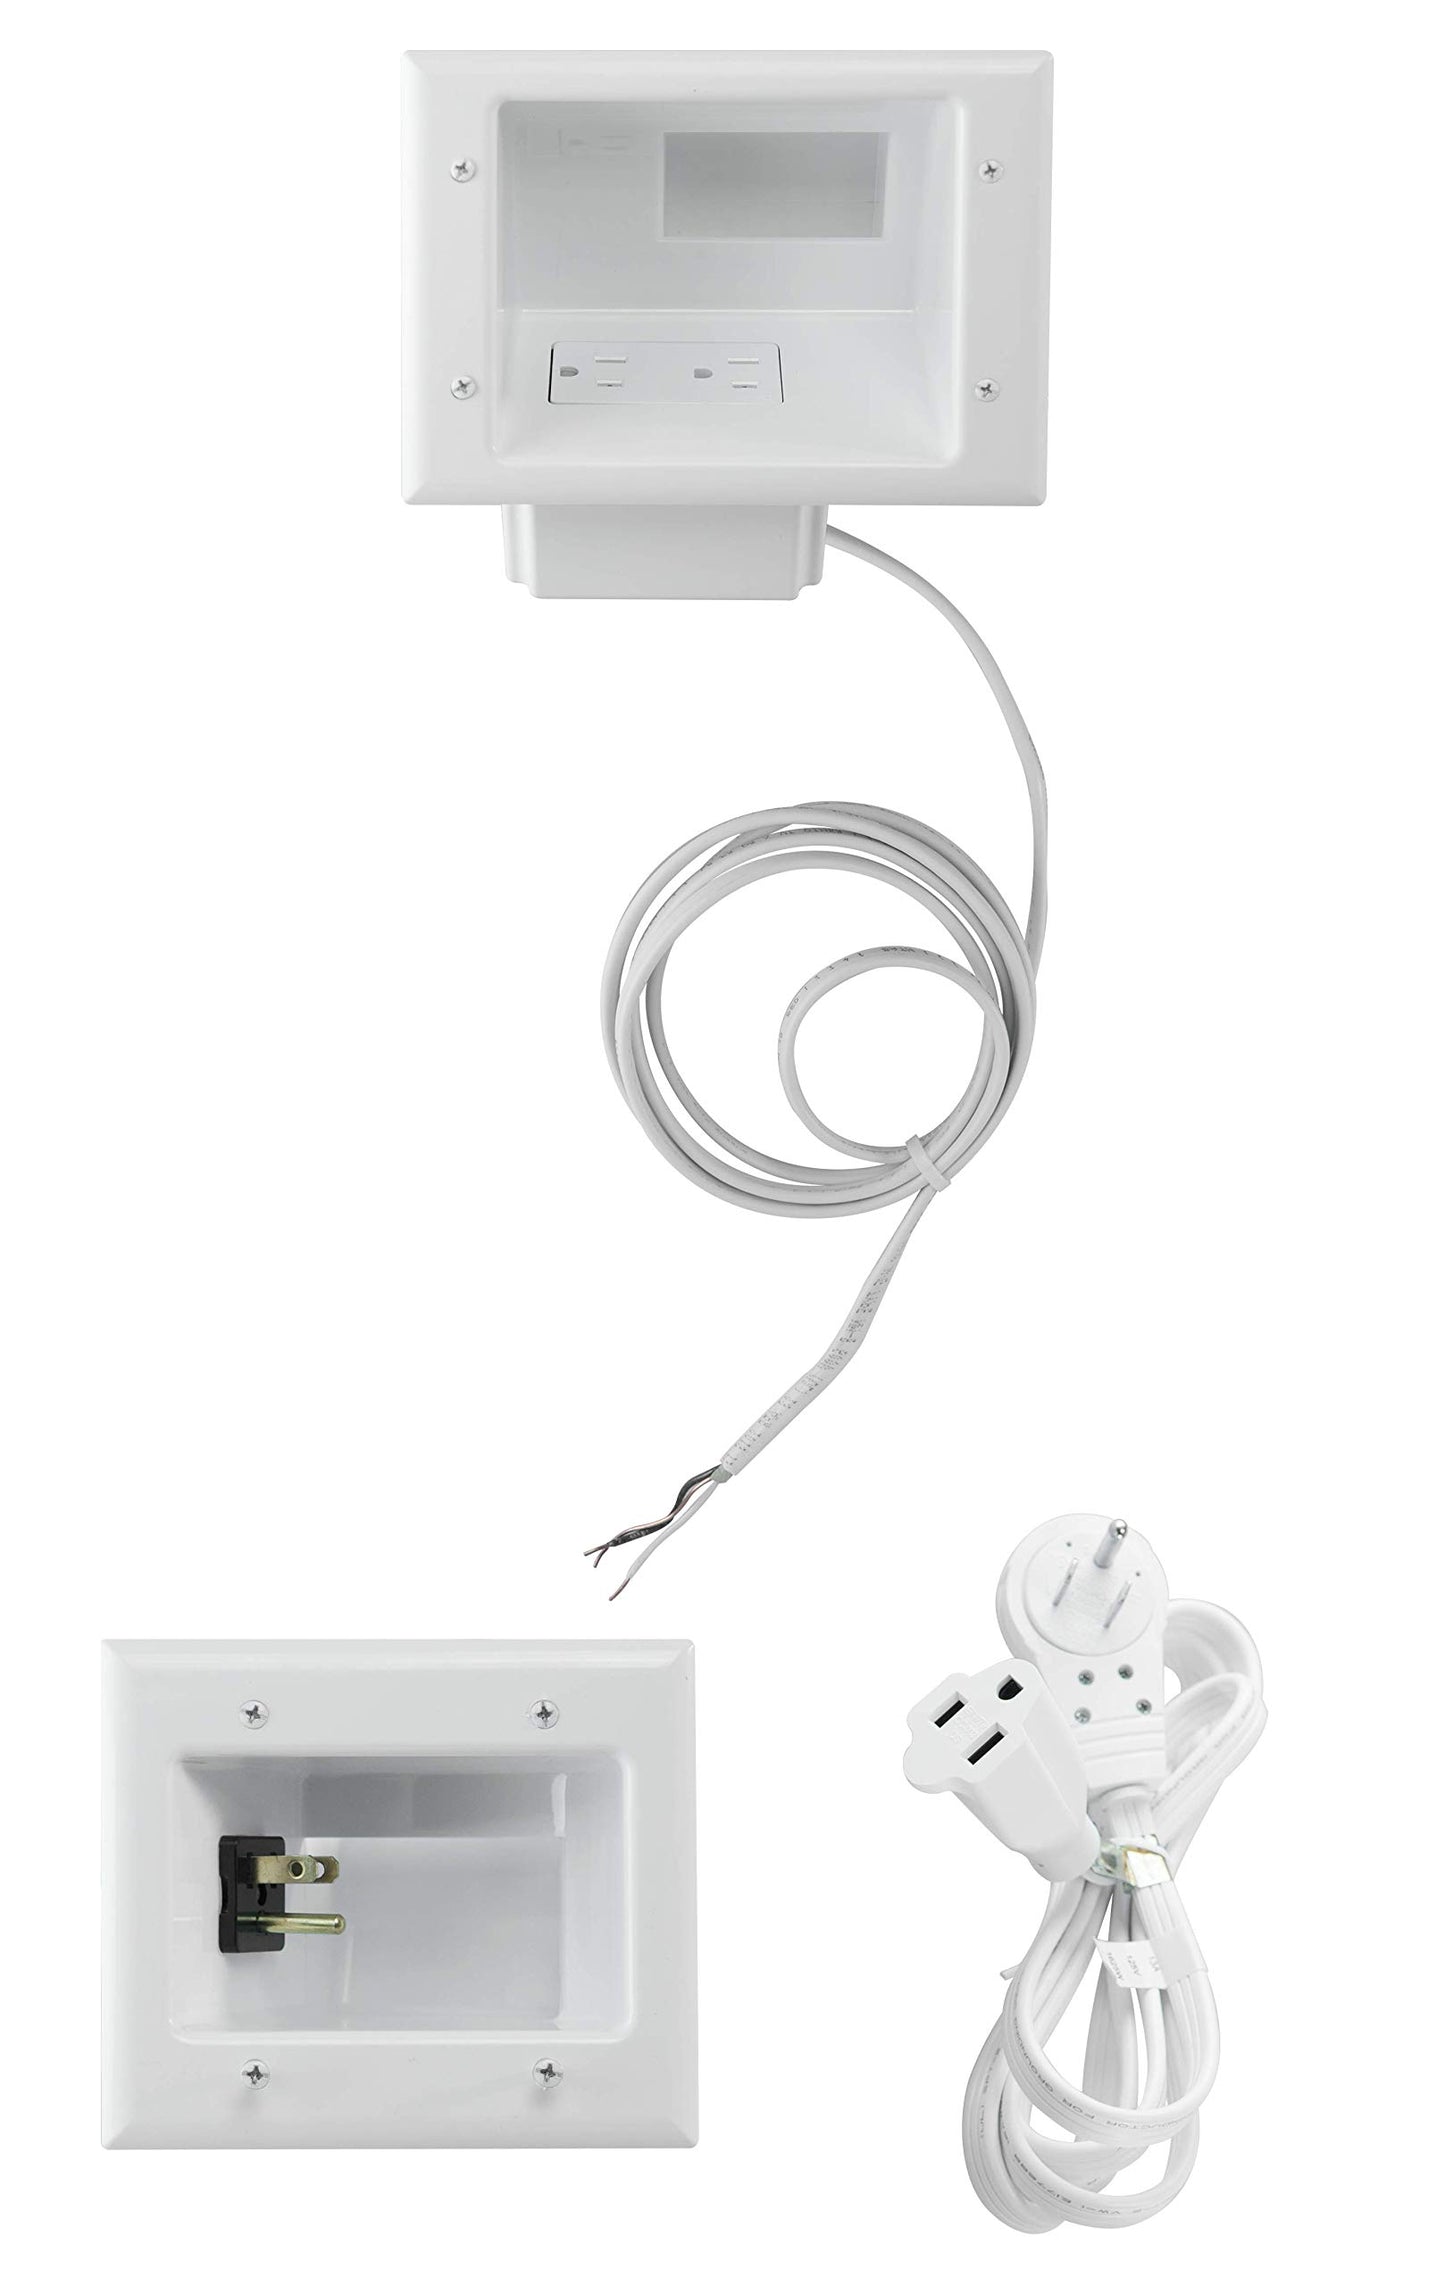 DataComm Electronics 50-3321-WH-KIT Flat Panel TV Cable Organizer Remodeling Kit with Power Outlet - White